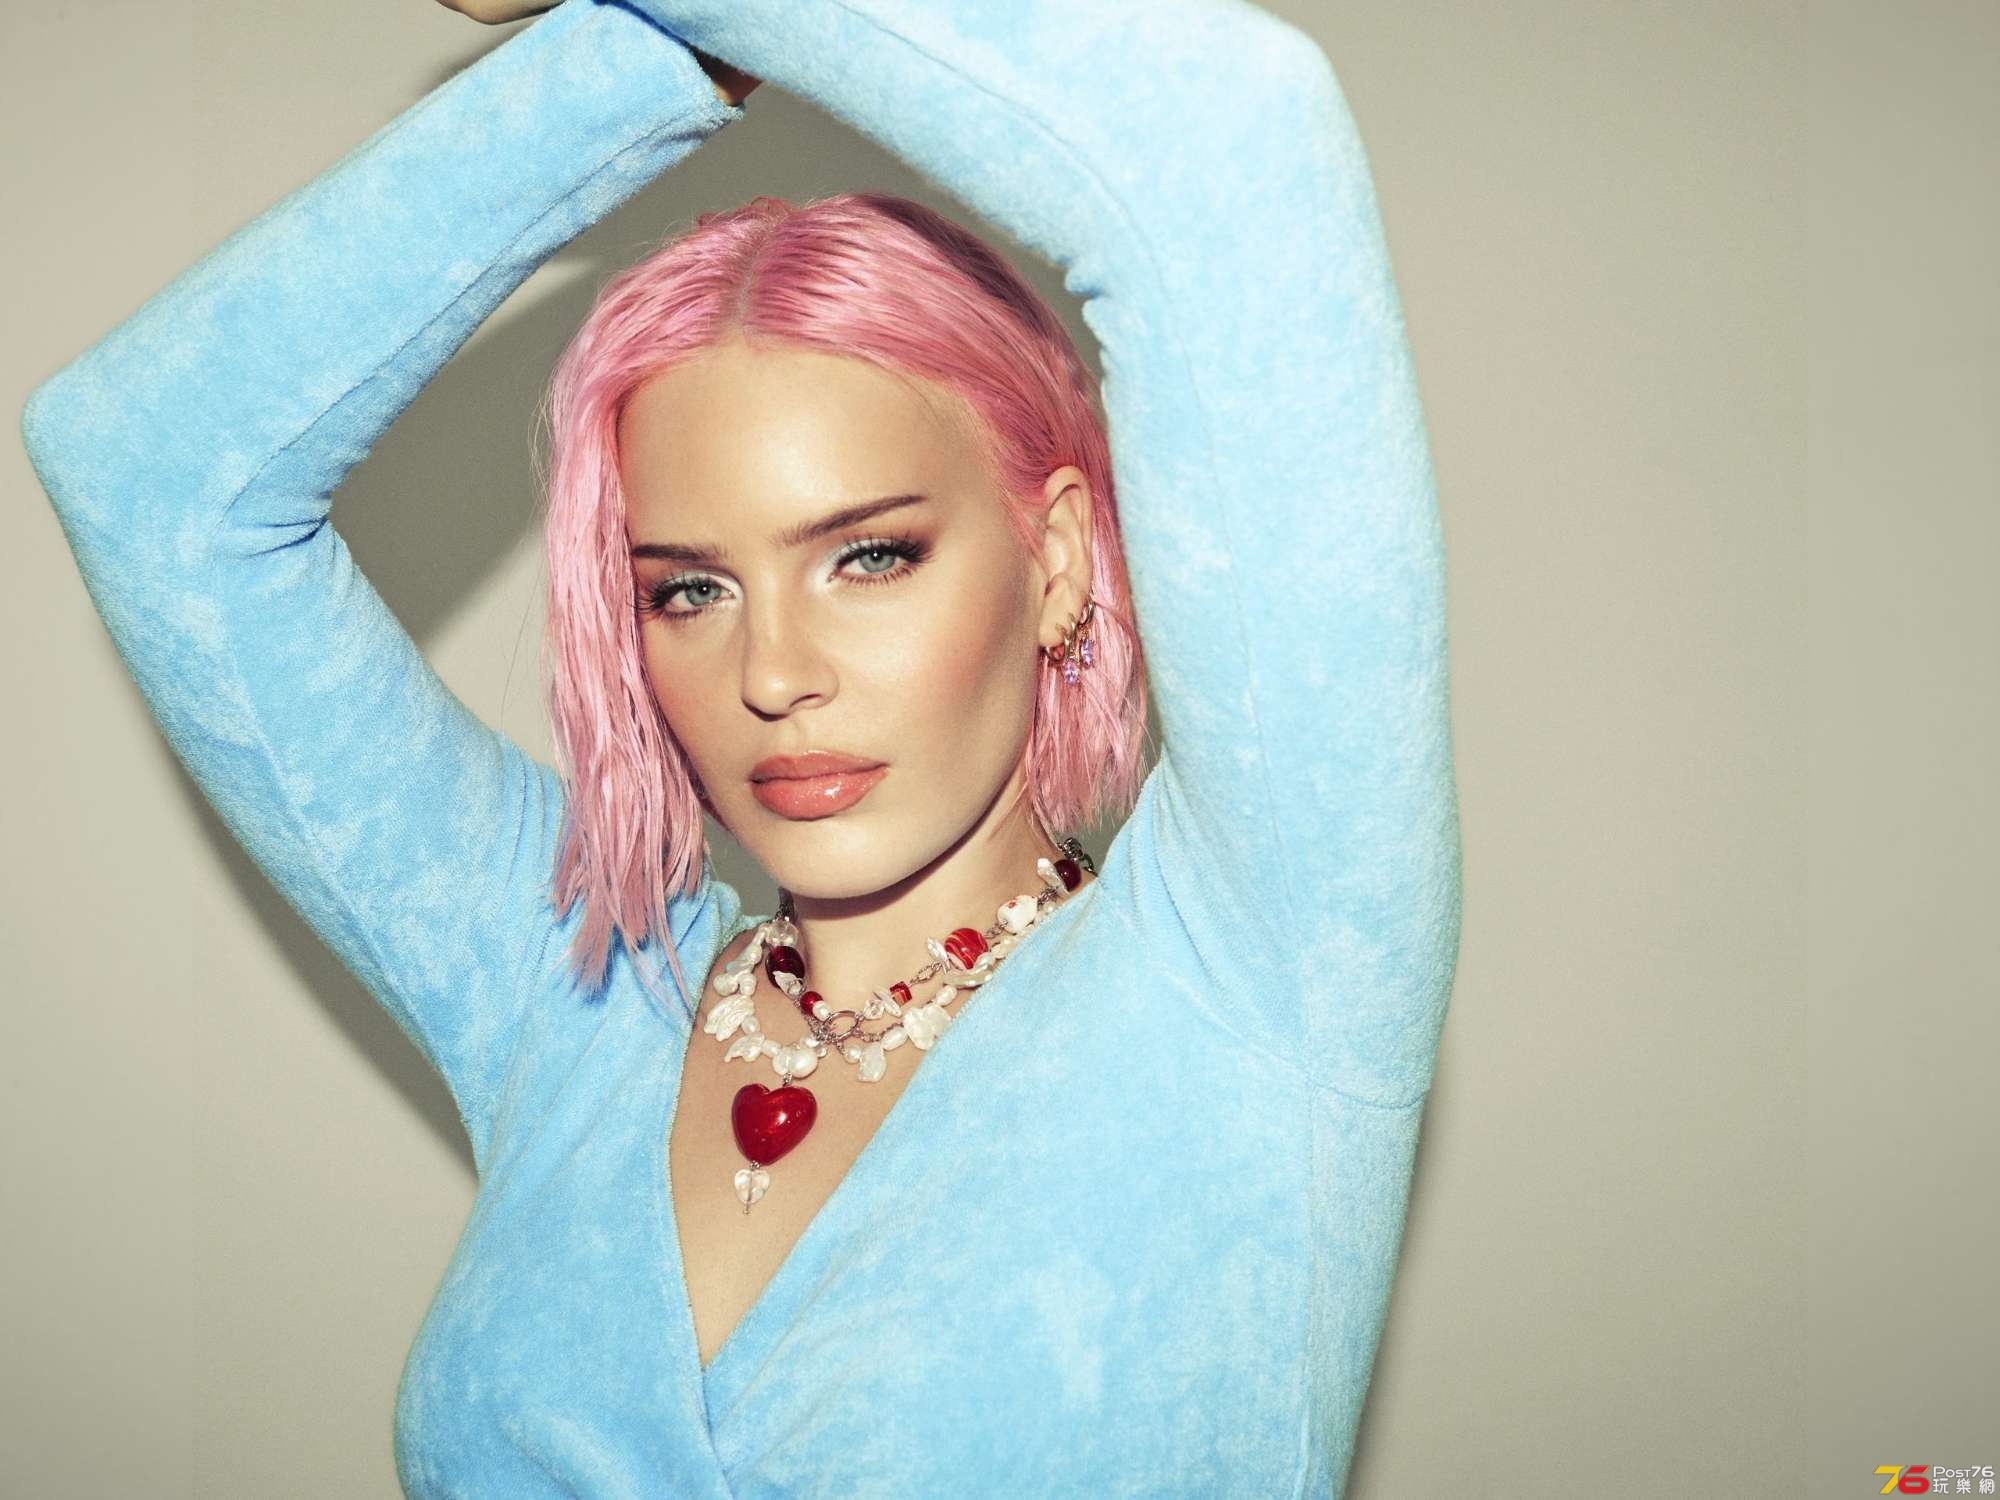 anne-marie-announces-full-tracklist-for-her-new-album-therapy-01-scaled.jpg